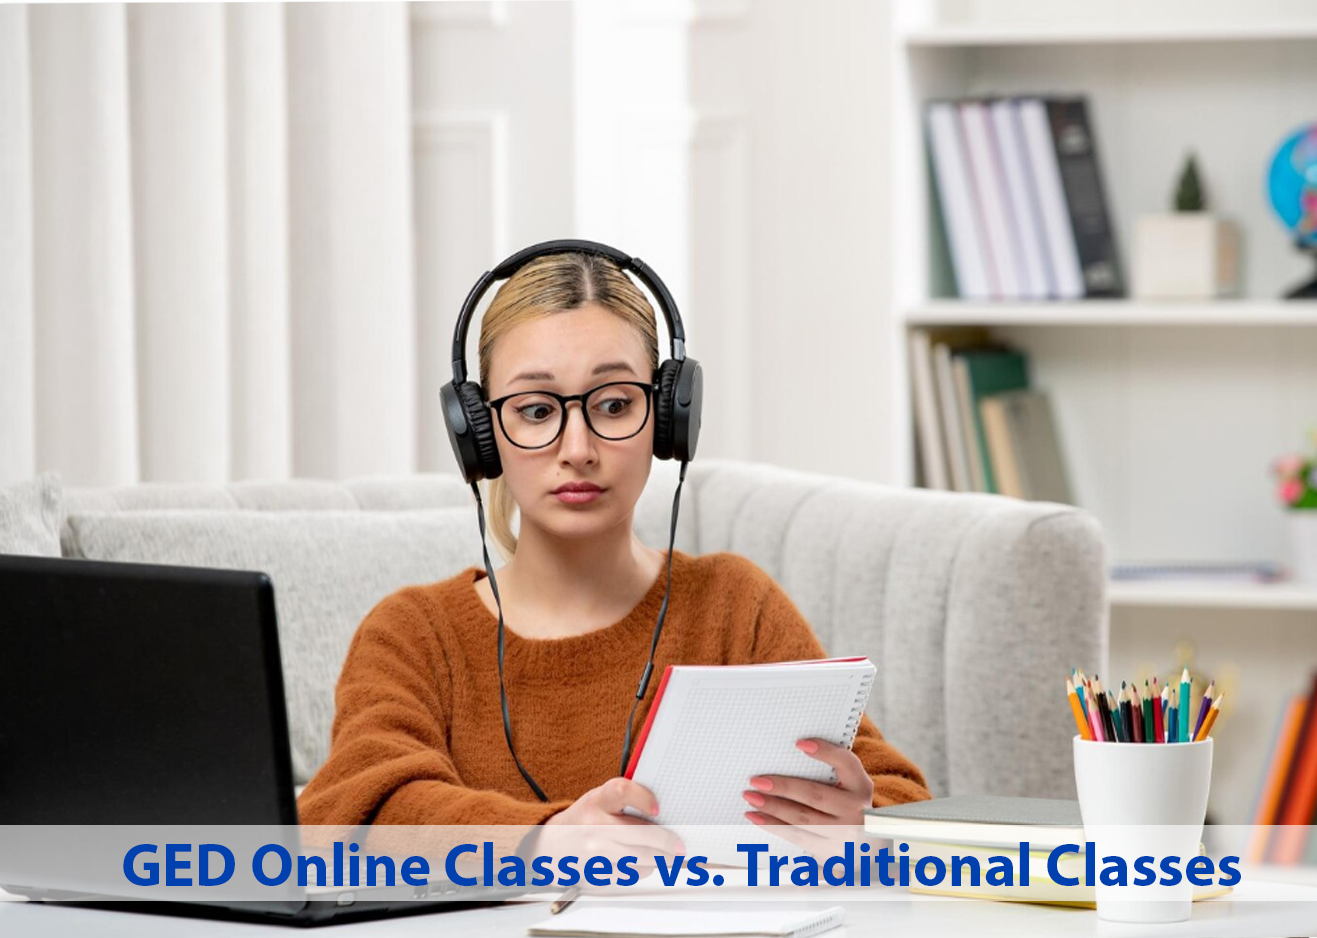 GED Online Classes vs. Traditional Classes